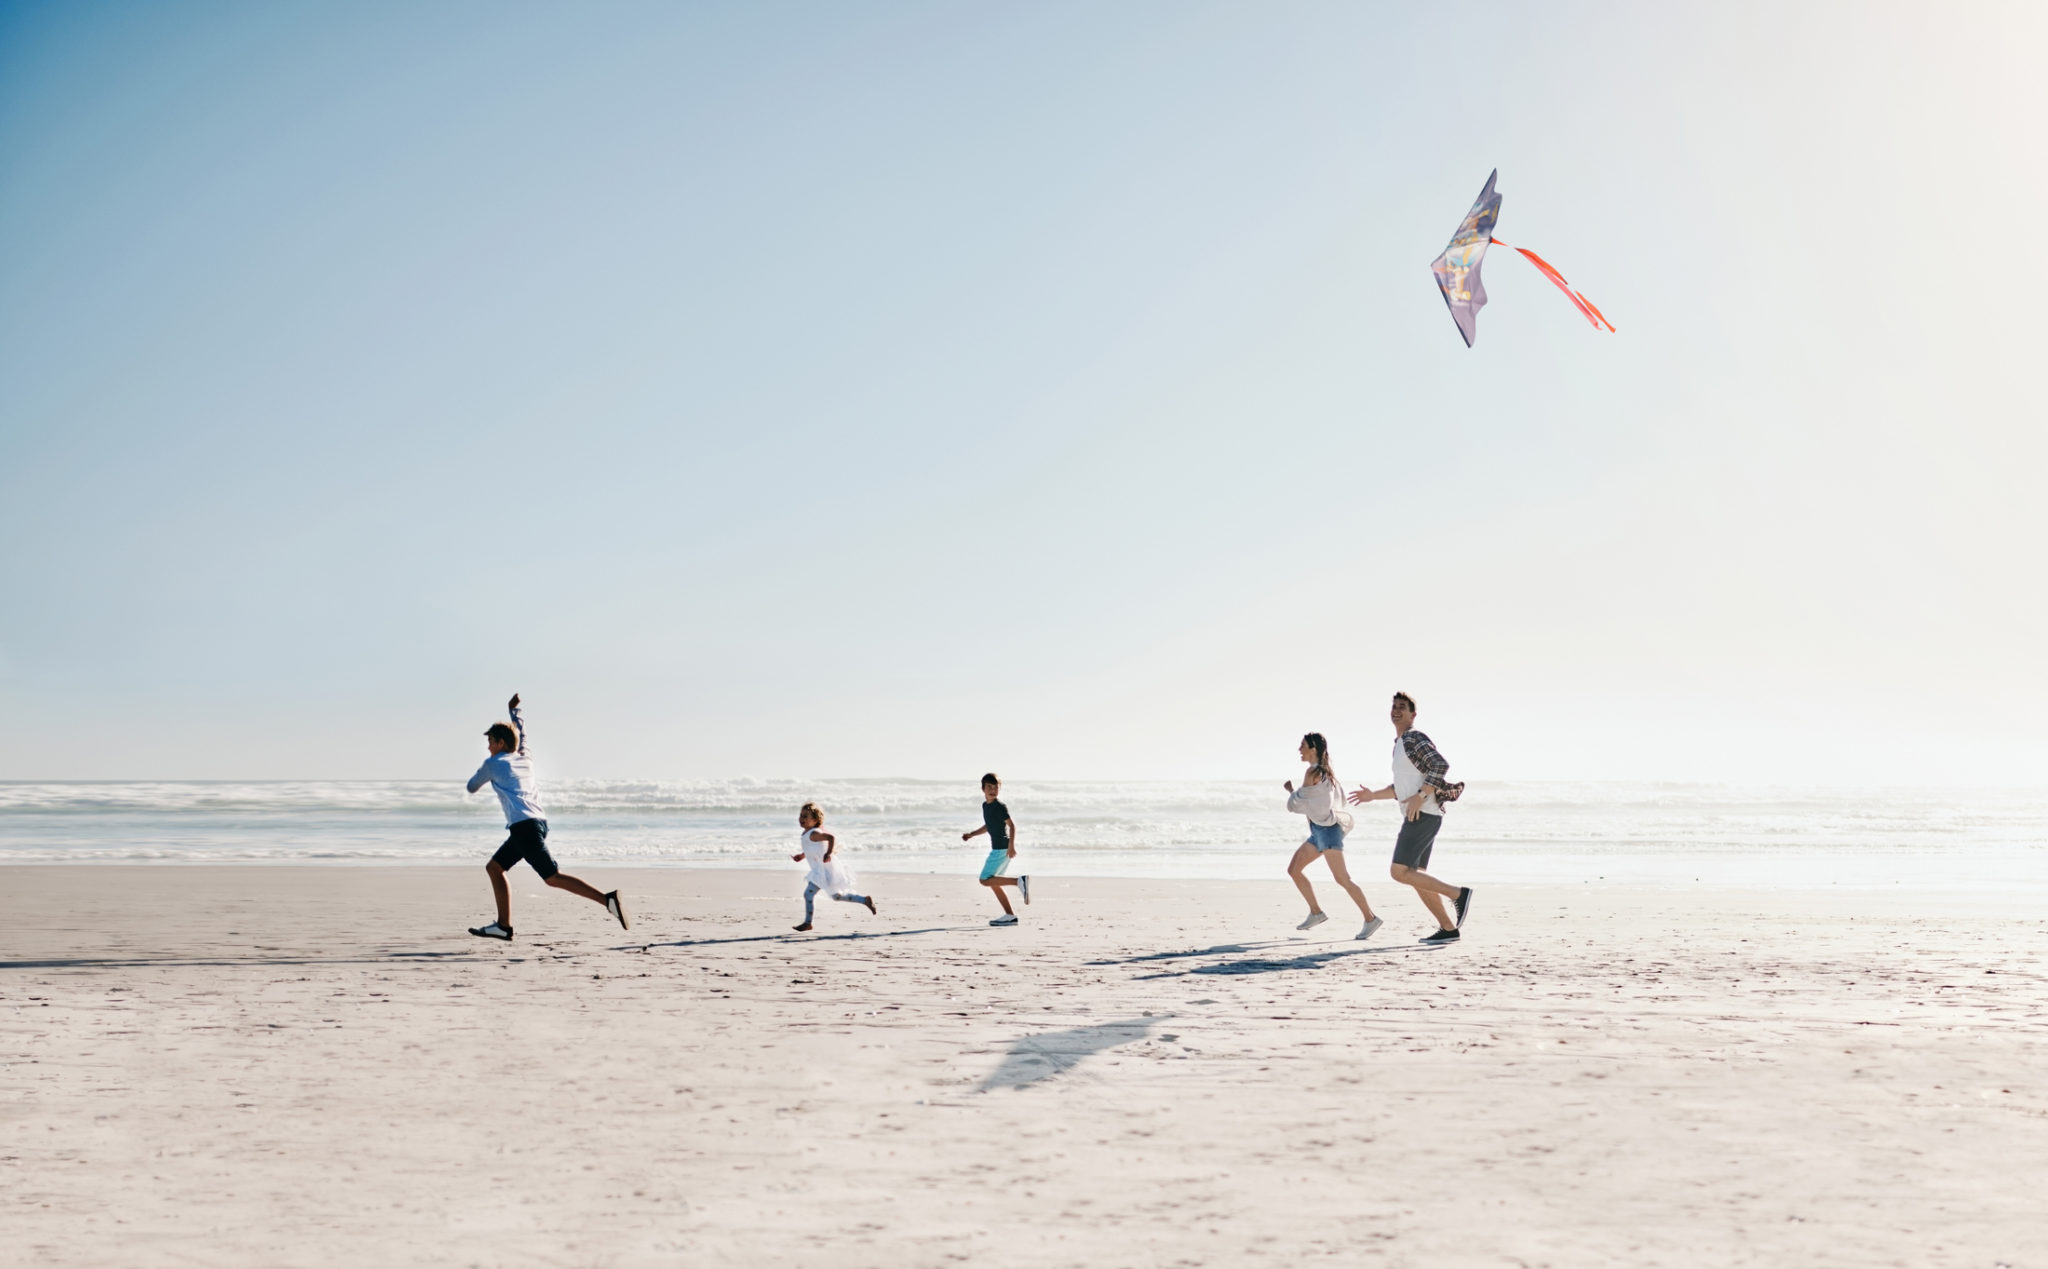 Myrtle Beach Family Activities, family running and flying kite on the beach